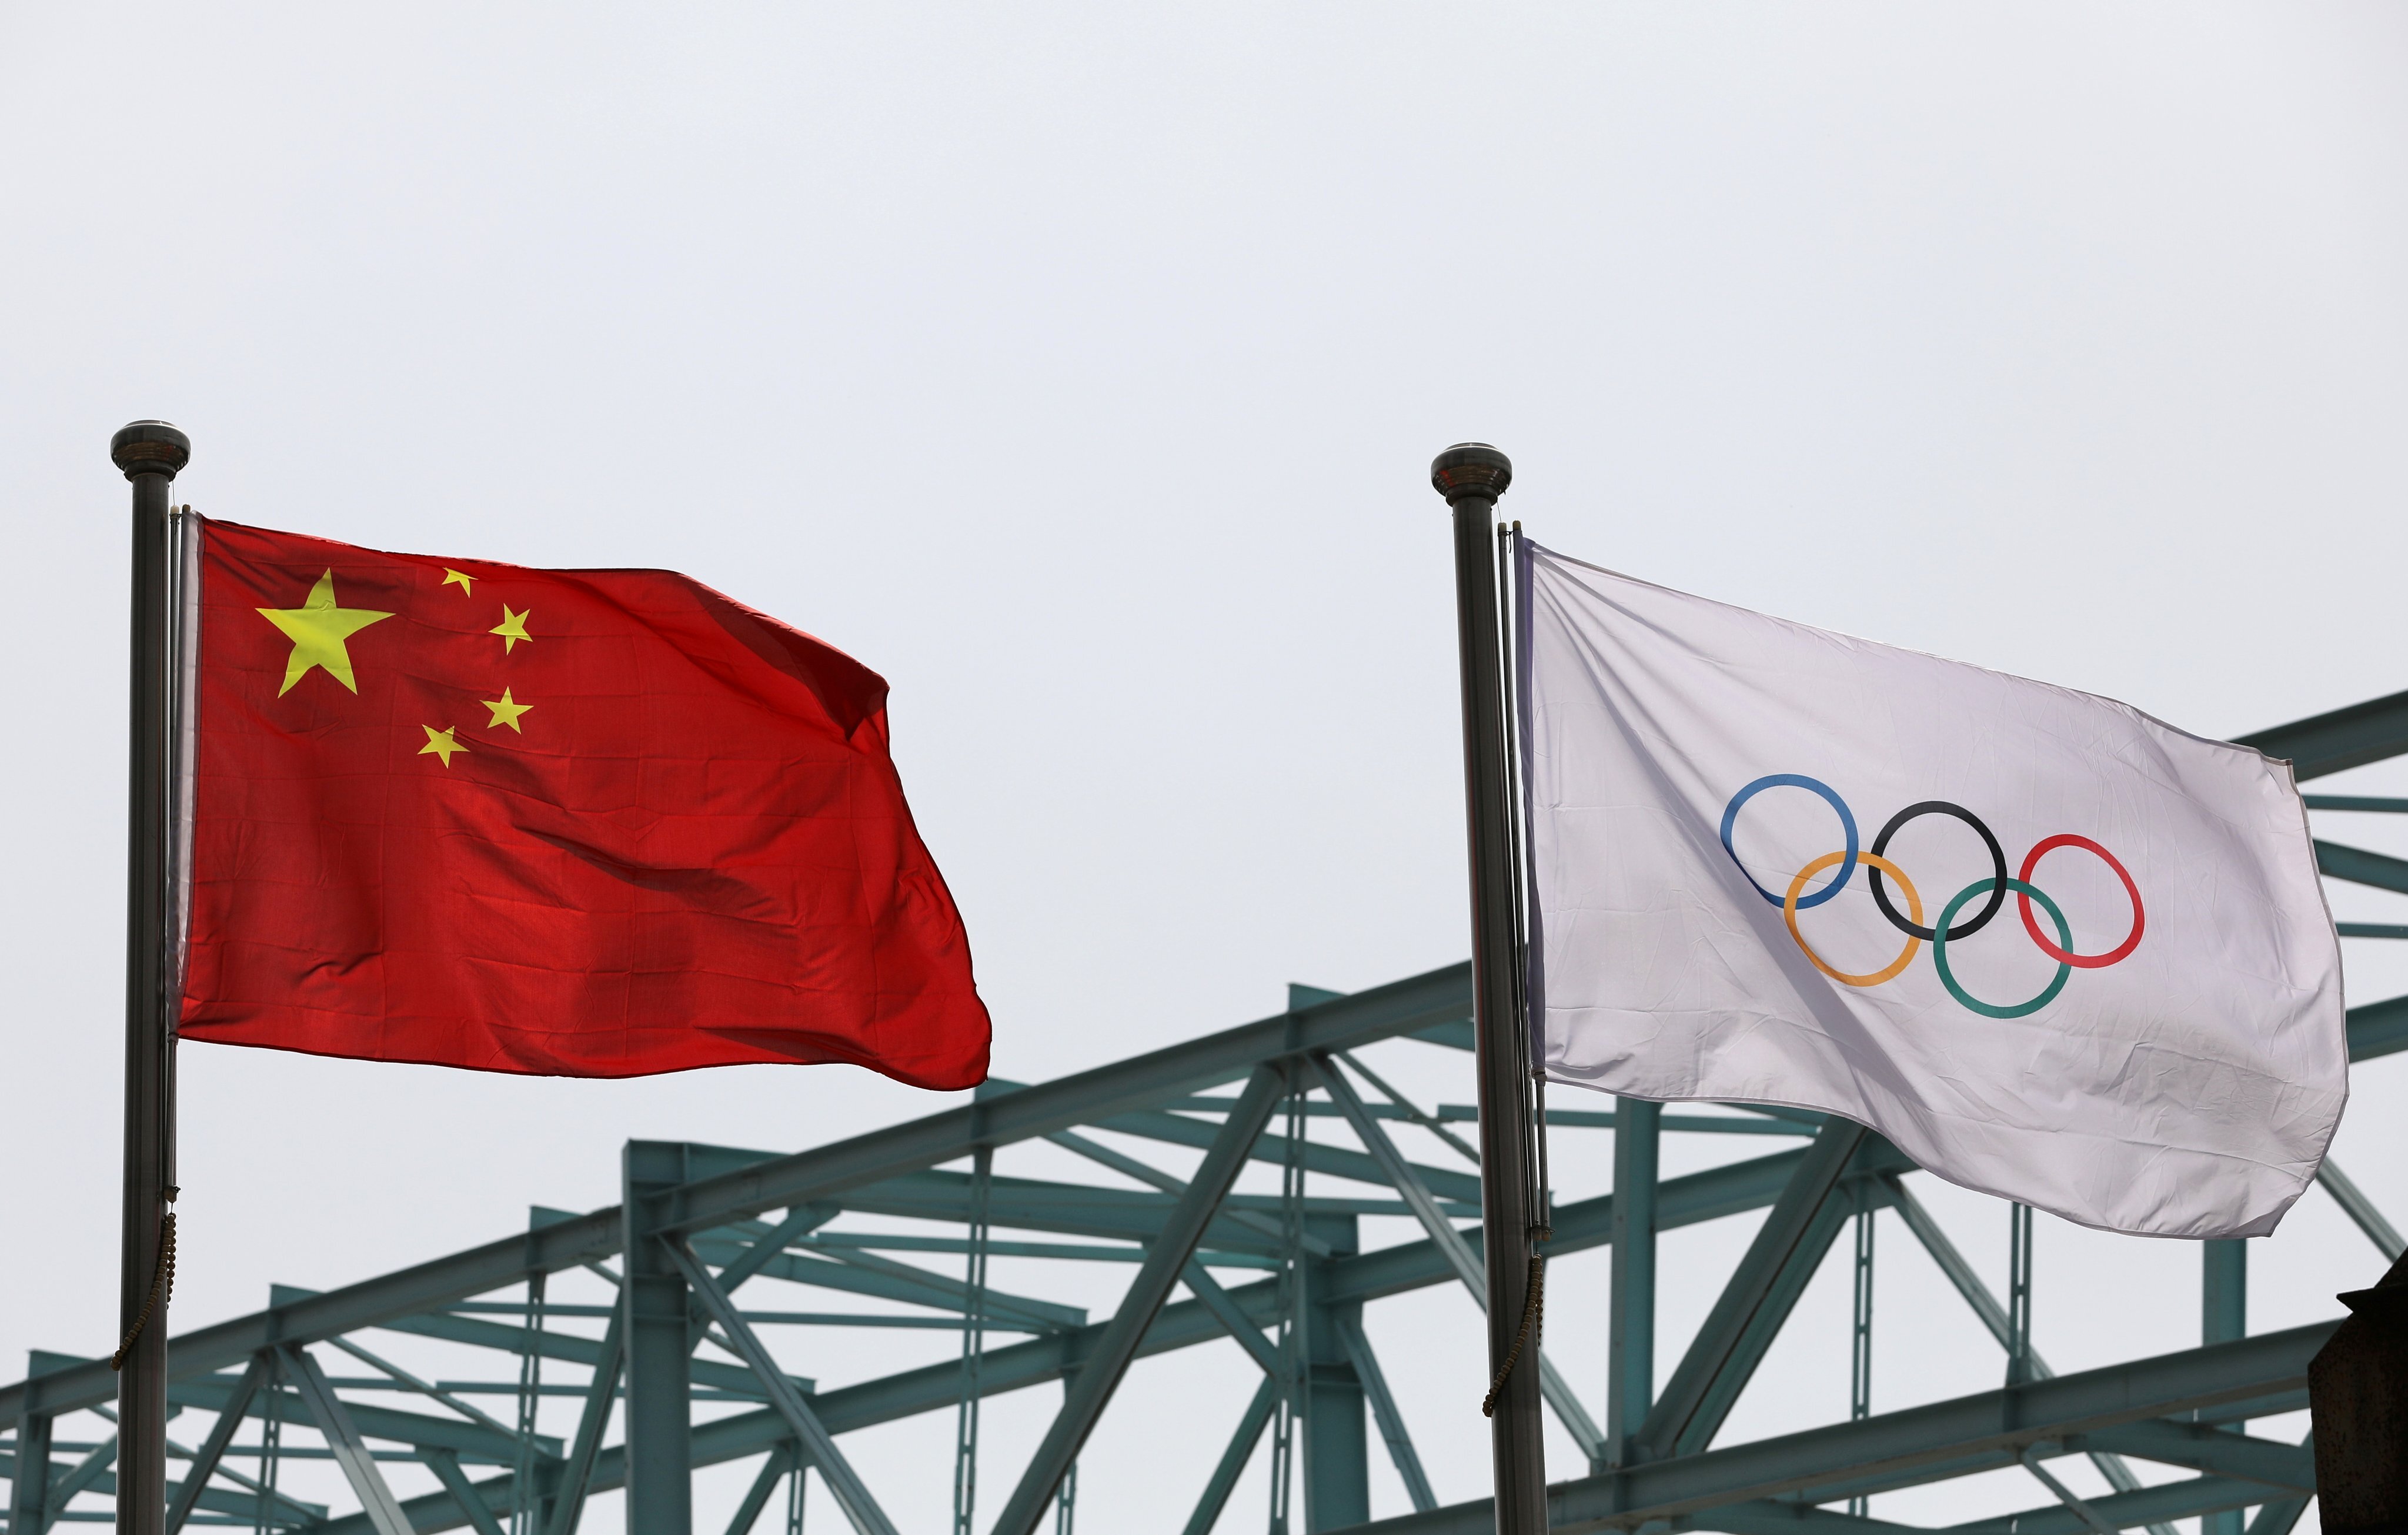 Nina Schultz, now known as Zheng Ninali, is hoping to compete under the China flag at the Tokyo Olympics. Photo: Reuters